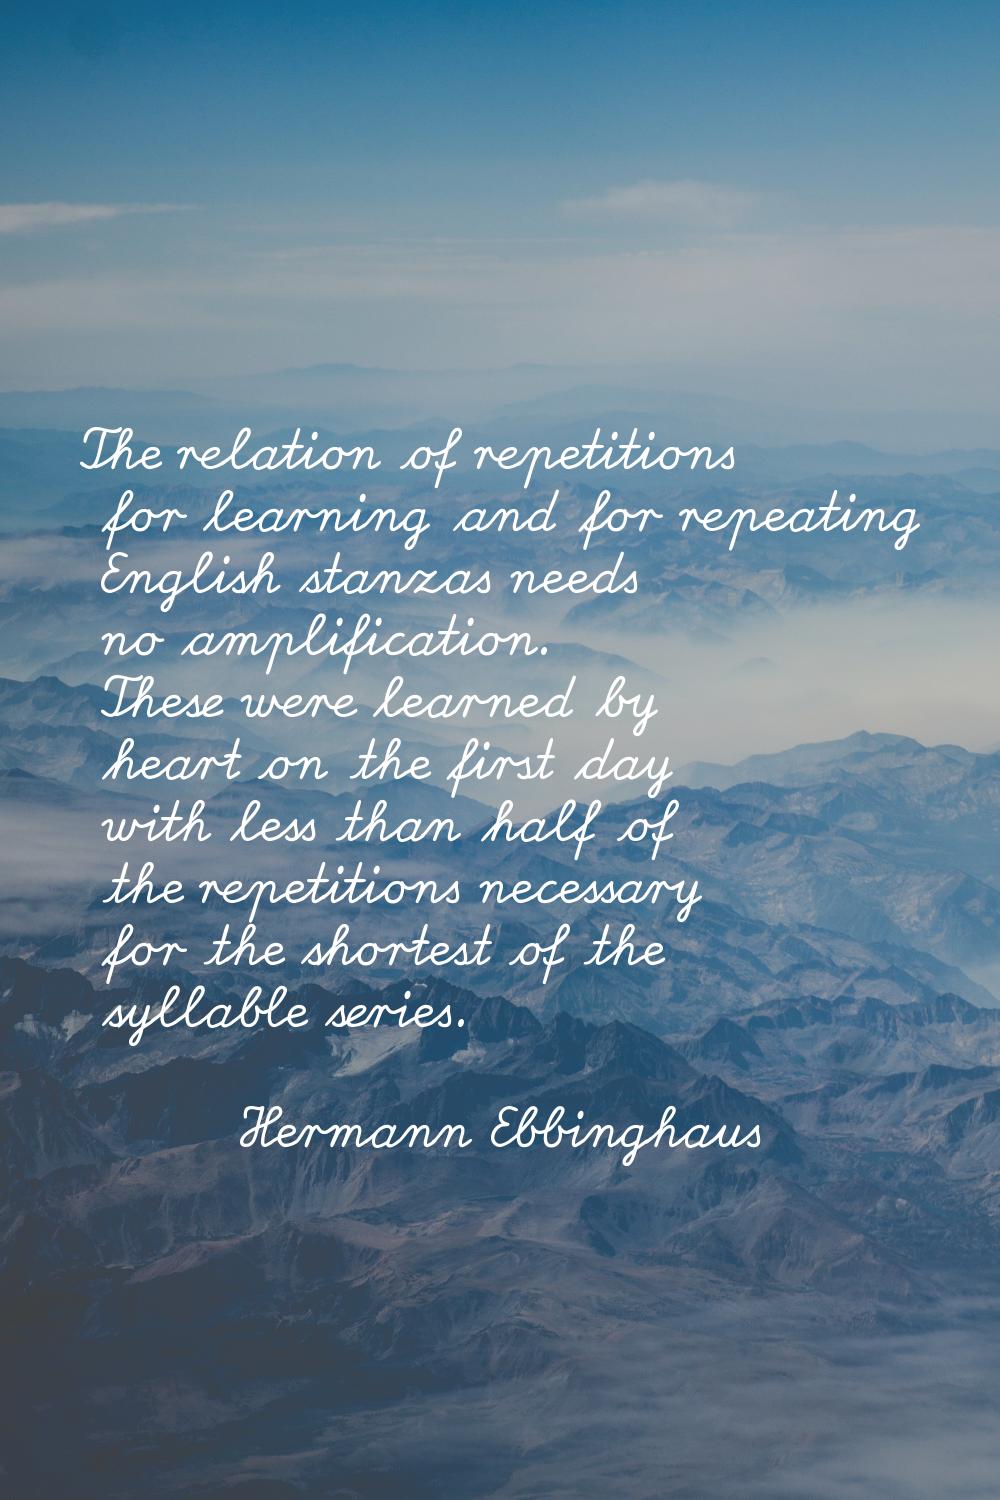 The relation of repetitions for learning and for repeating English stanzas needs no amplification. 